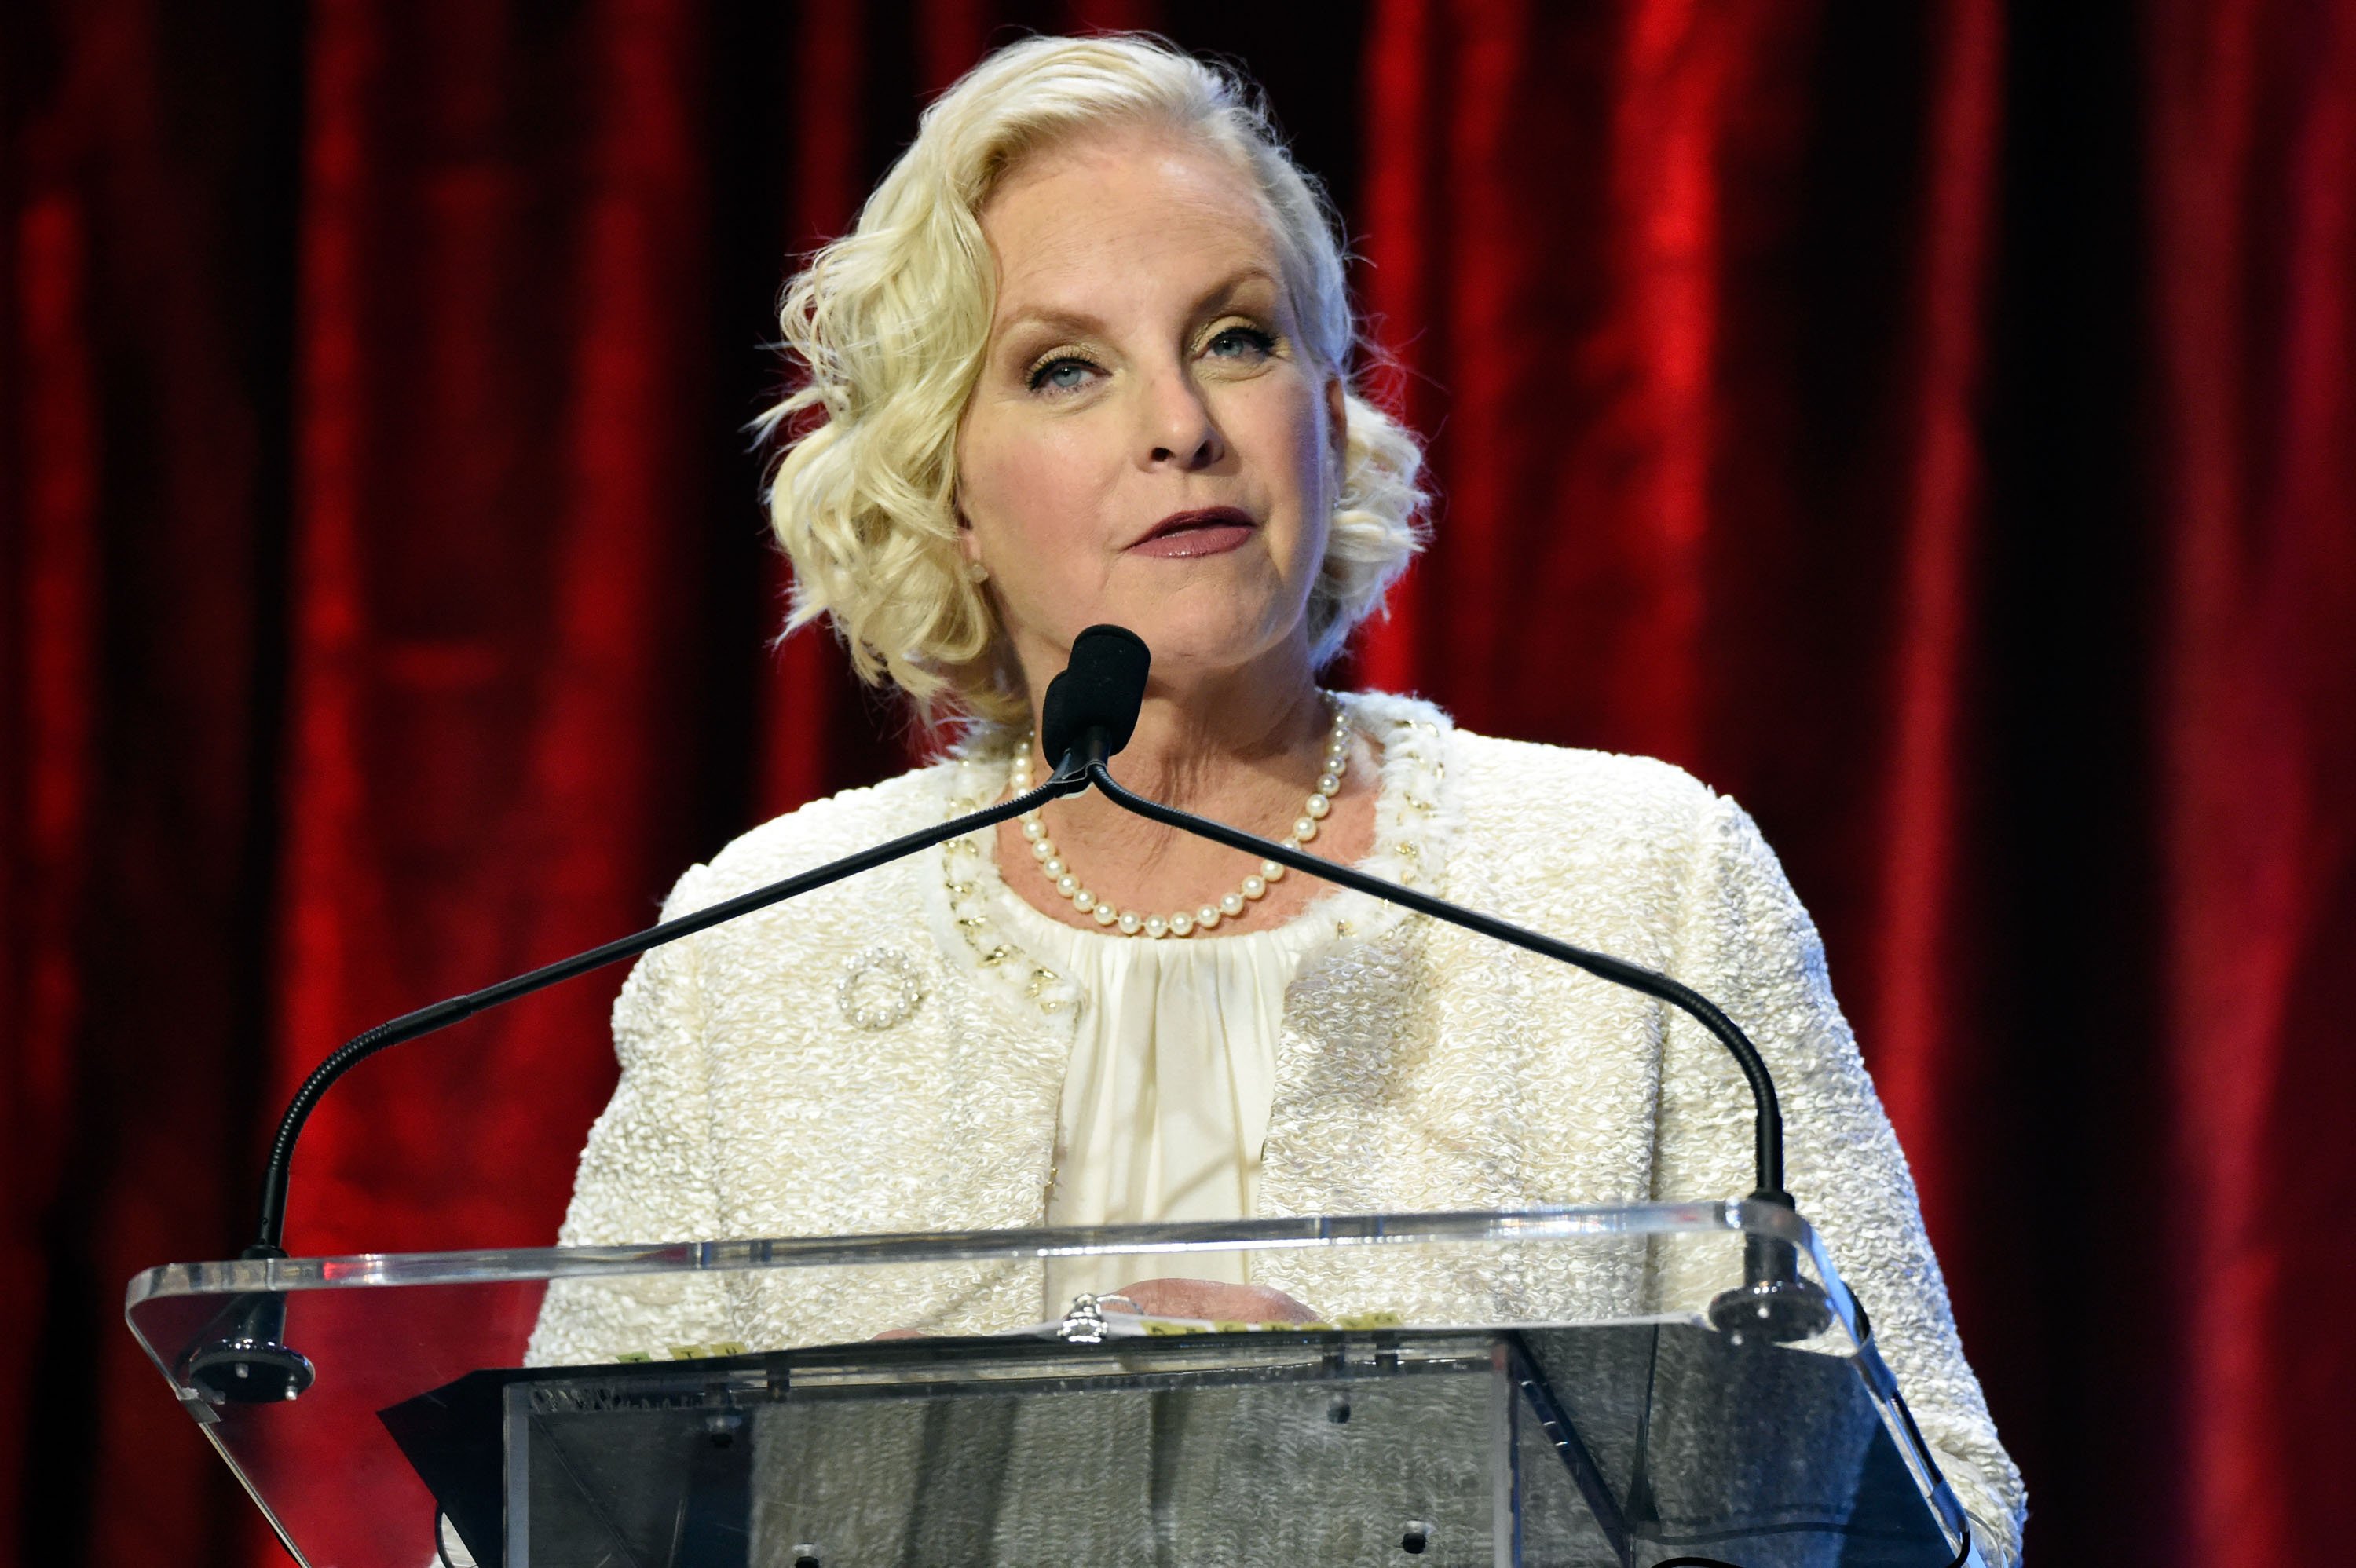 Cindy McCain at the Muhammad Ali Humanitarian Awards at Marriott Louisville Downtown on September 17, 2016 in Louisville, Kentucky | Photo: Getty Images